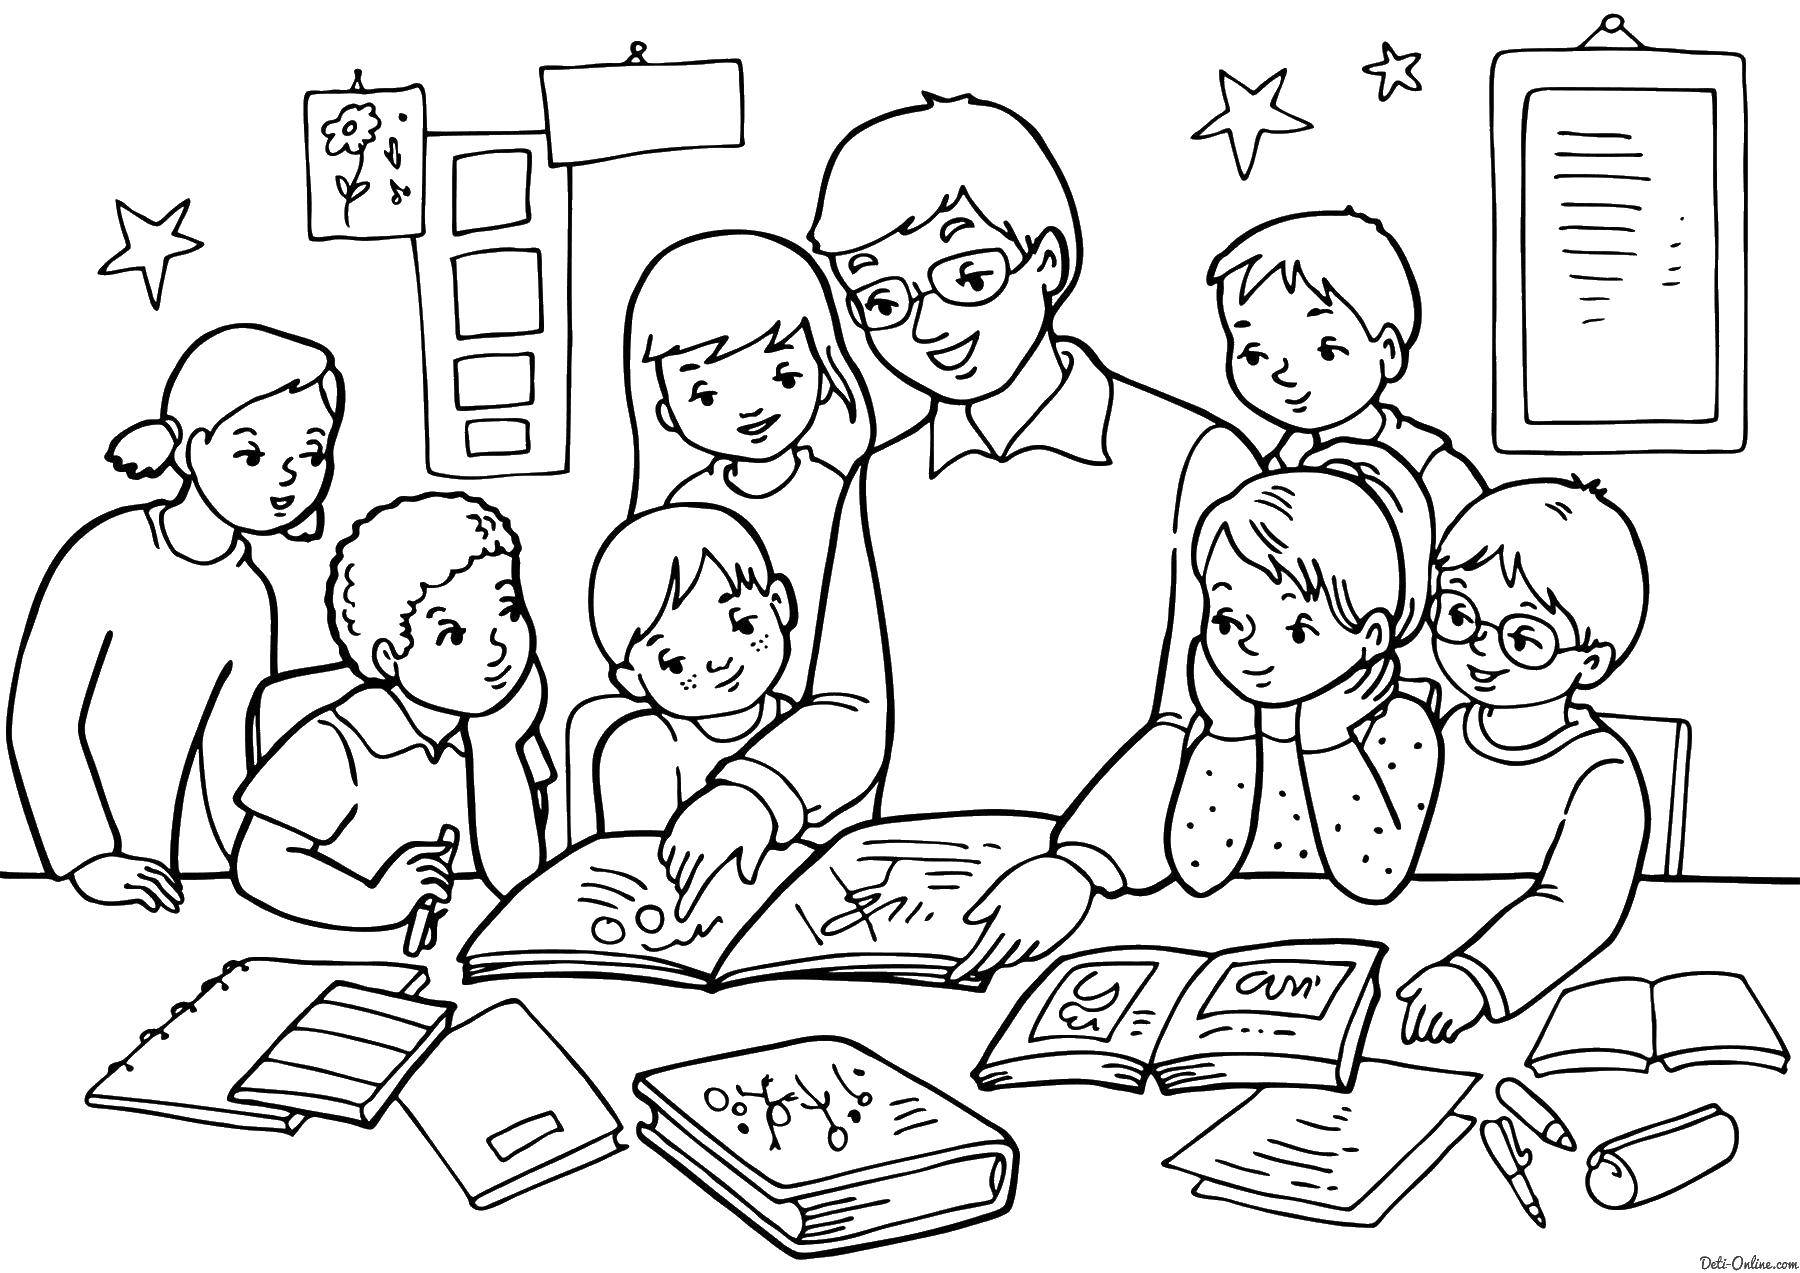 Coloring Teacher with students. Category the teacher. Tags:  the teacher, students.